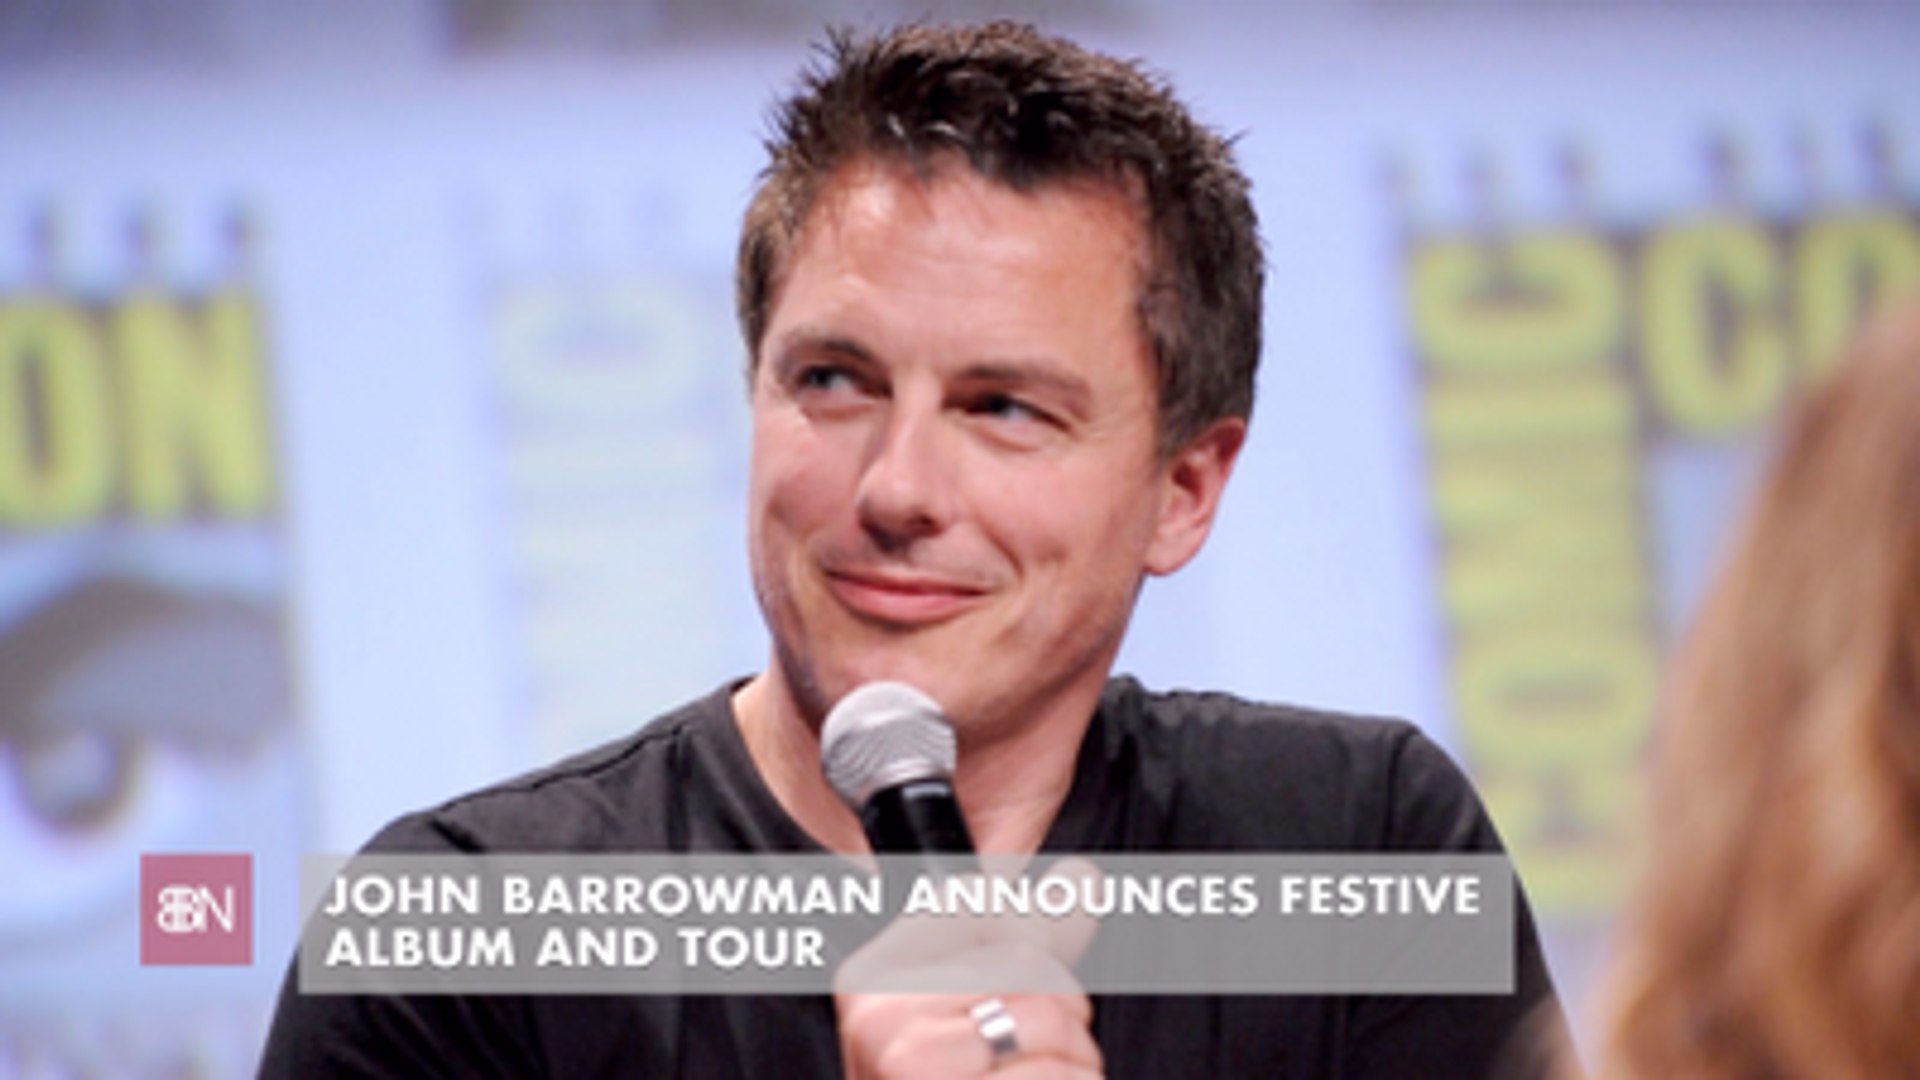 John Barrowman S Christmas Music Is Coming To Town Video Dailymotion Images, Photos, Reviews